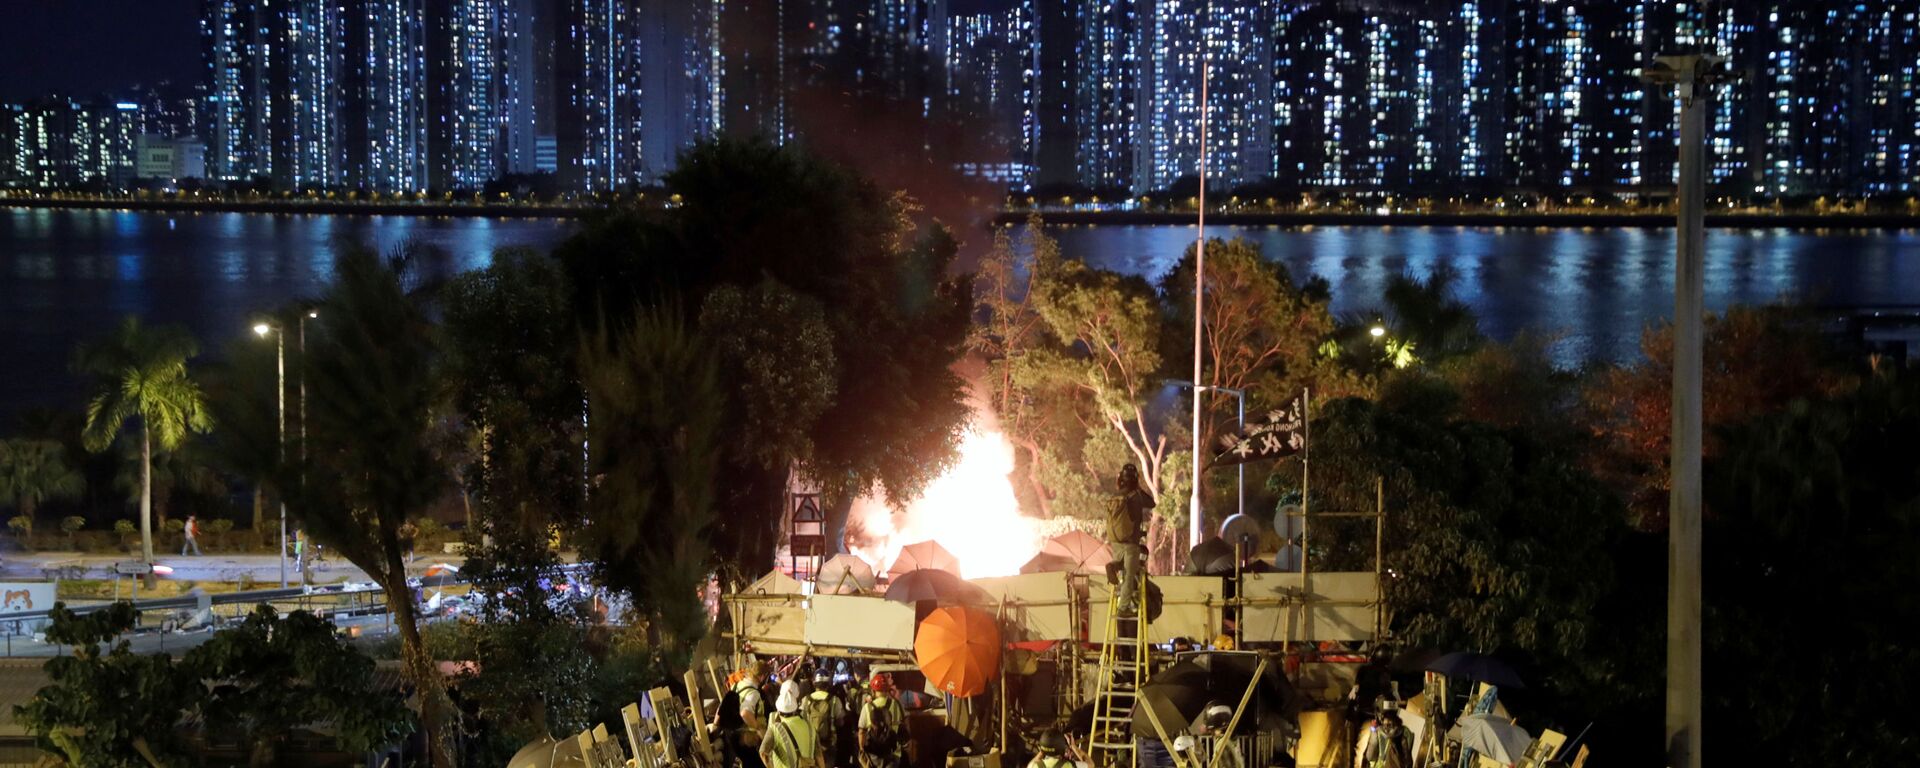 Protesters block Tolo Highway outside Chinese University campus in Hong Kong - Sputnik International, 1920, 23.11.2019